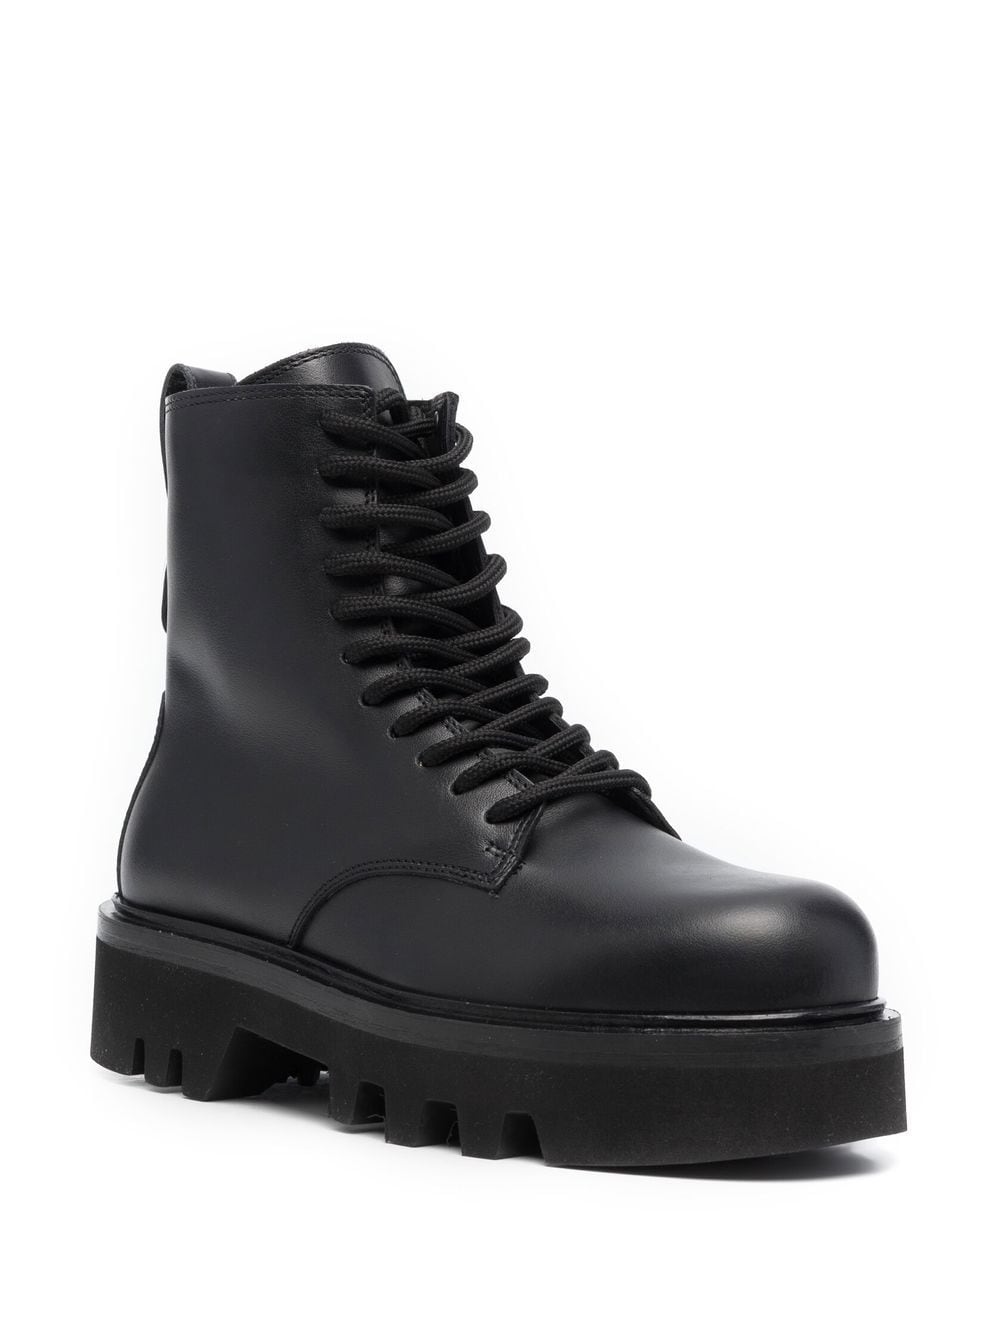 Furla lace-up Leather Boots - Farfetch